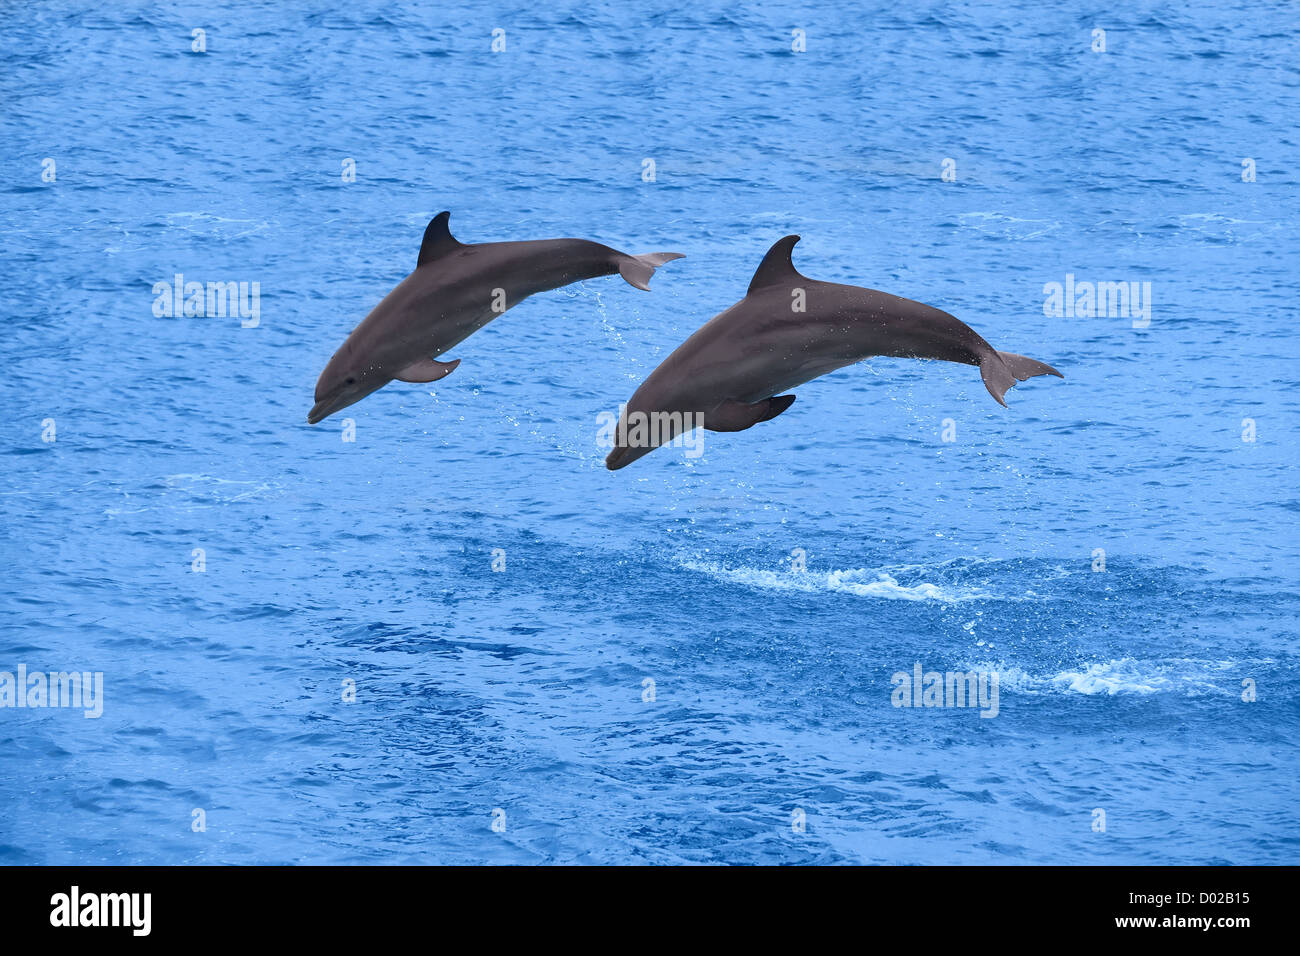 Two dolphins jumping in the Caribbean sea Stock Photo